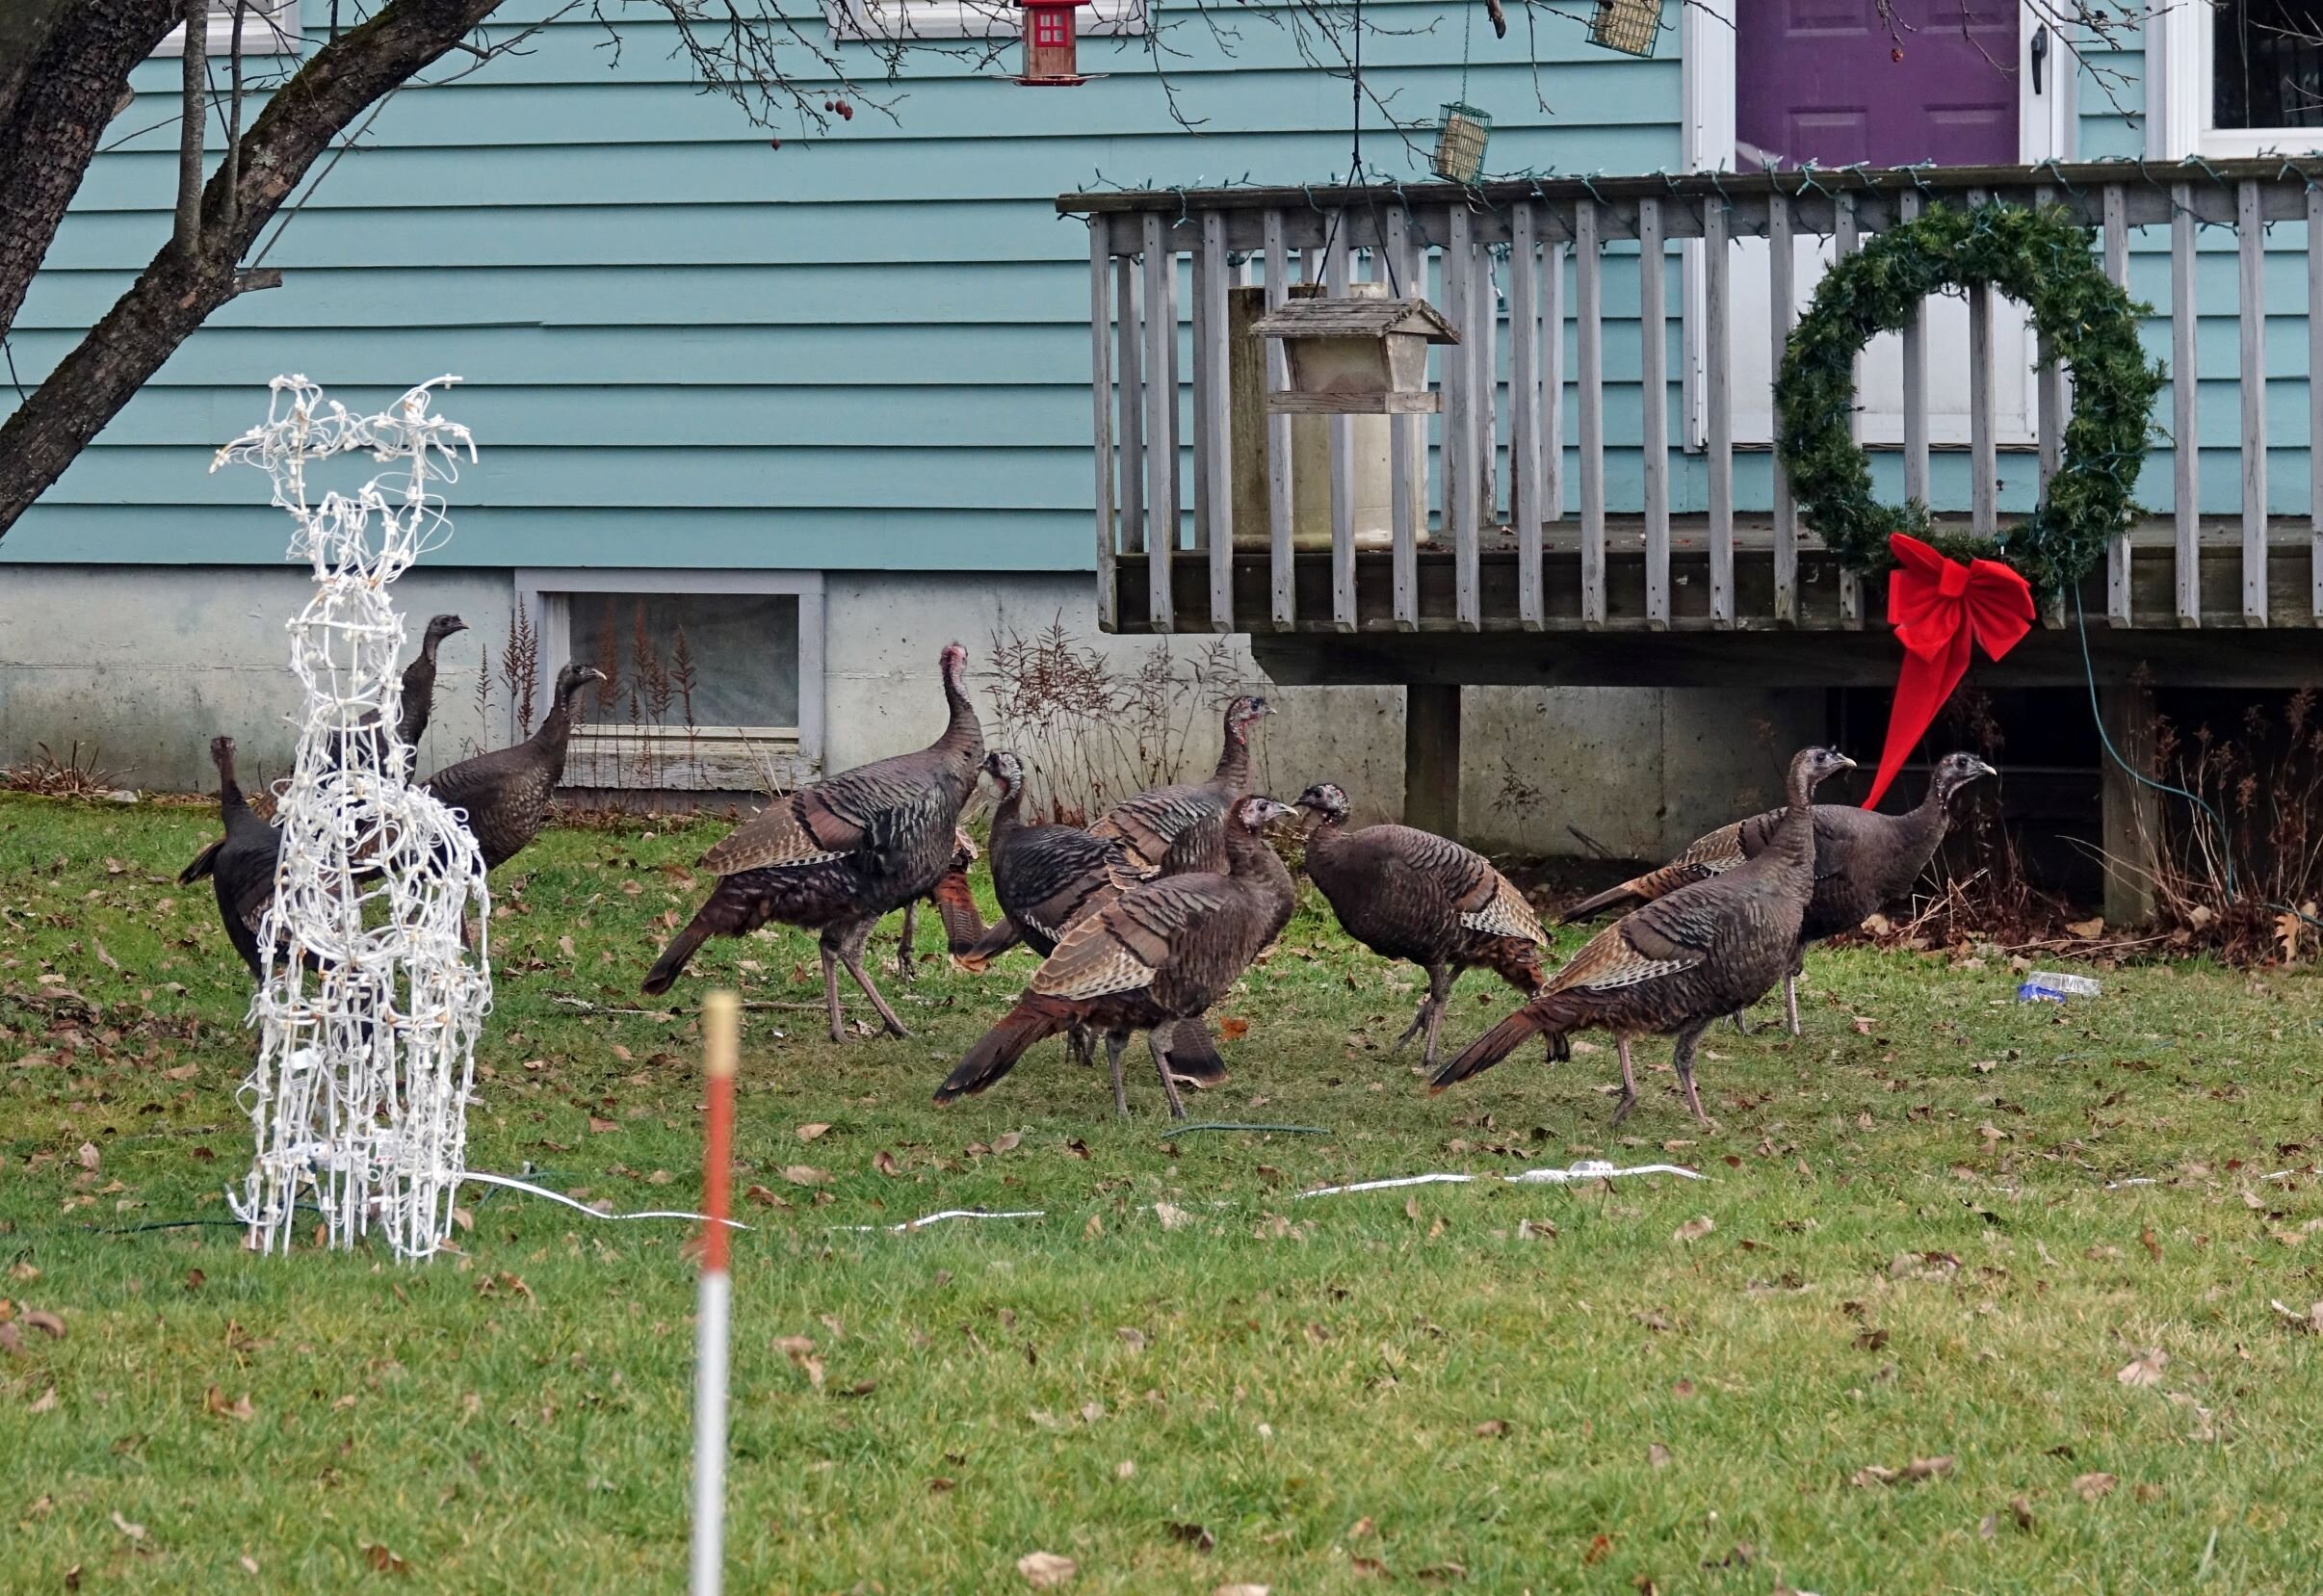   Visitors on Guptil Road check out  the Christmas decorations. Photo by Gordon Miller.   